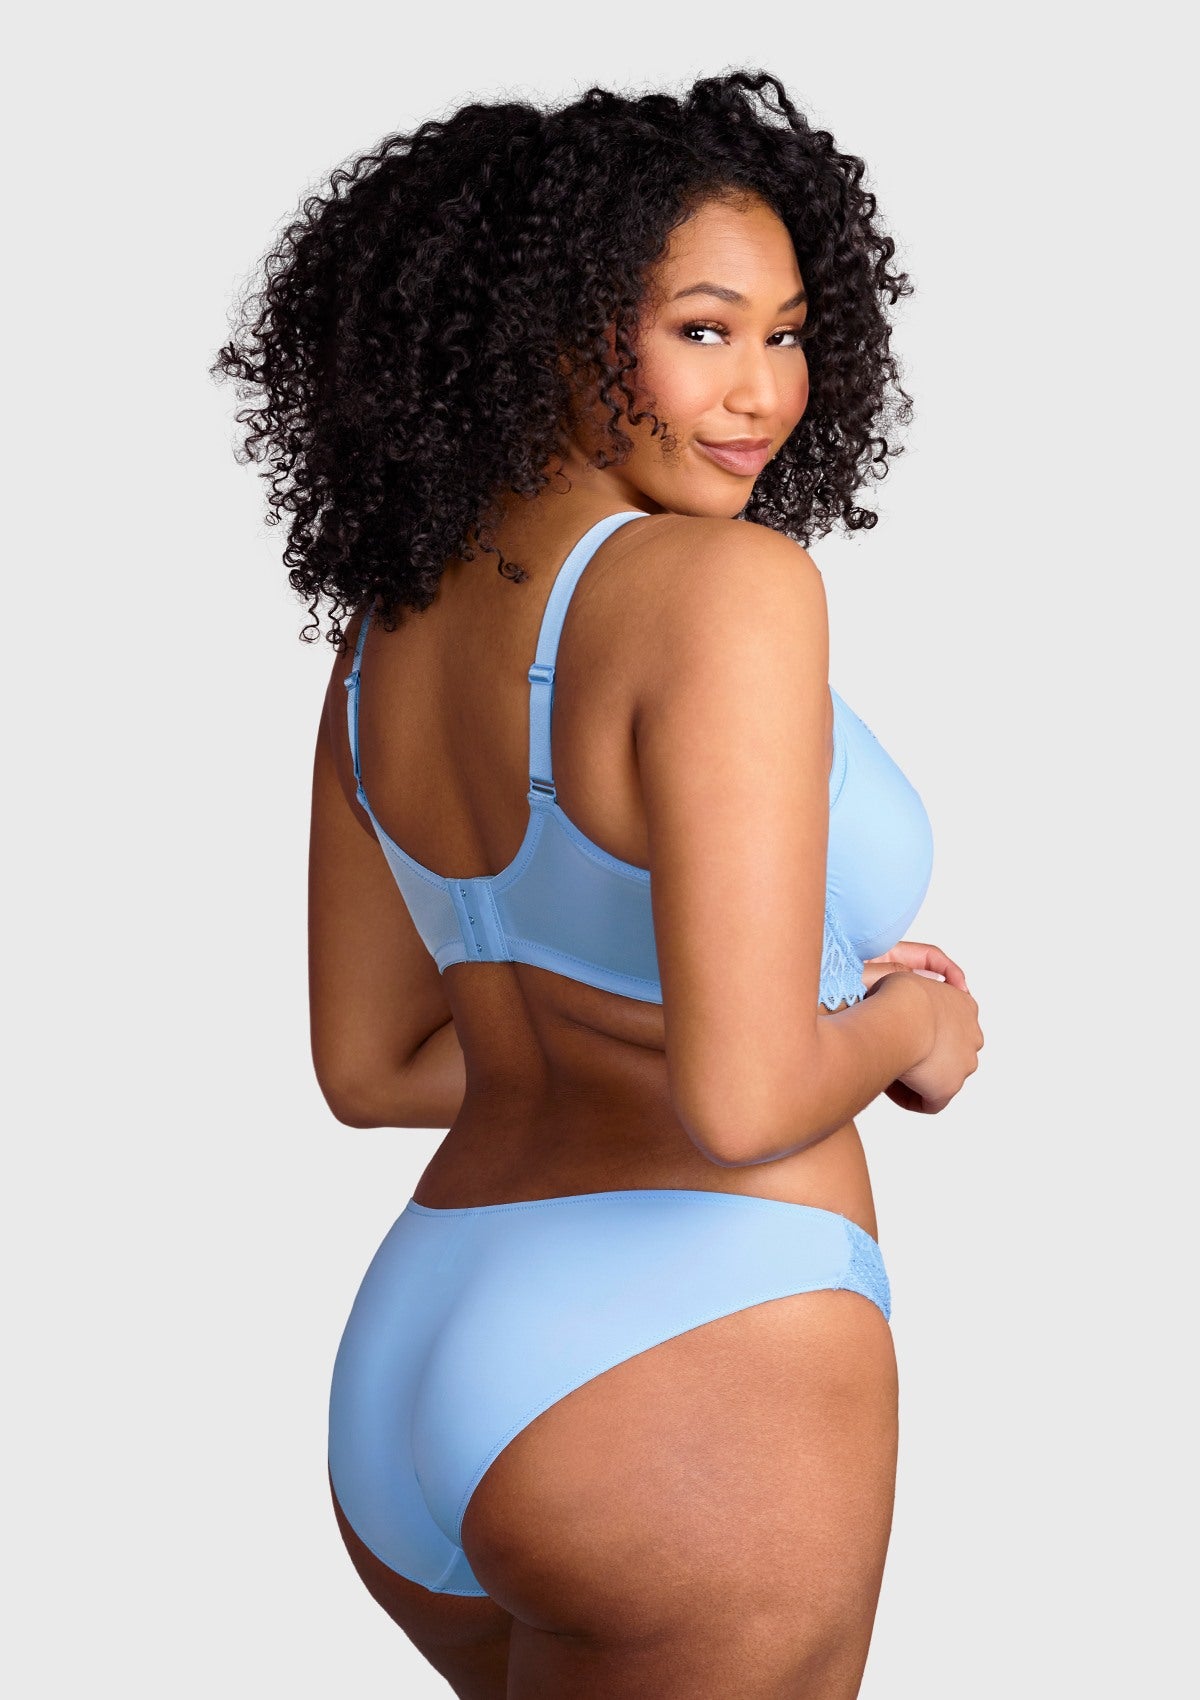 HSIA Pretty Secrets Lace-Trimmed Full Coverage Underwire Bra For Support - Light Blue / 38 / D